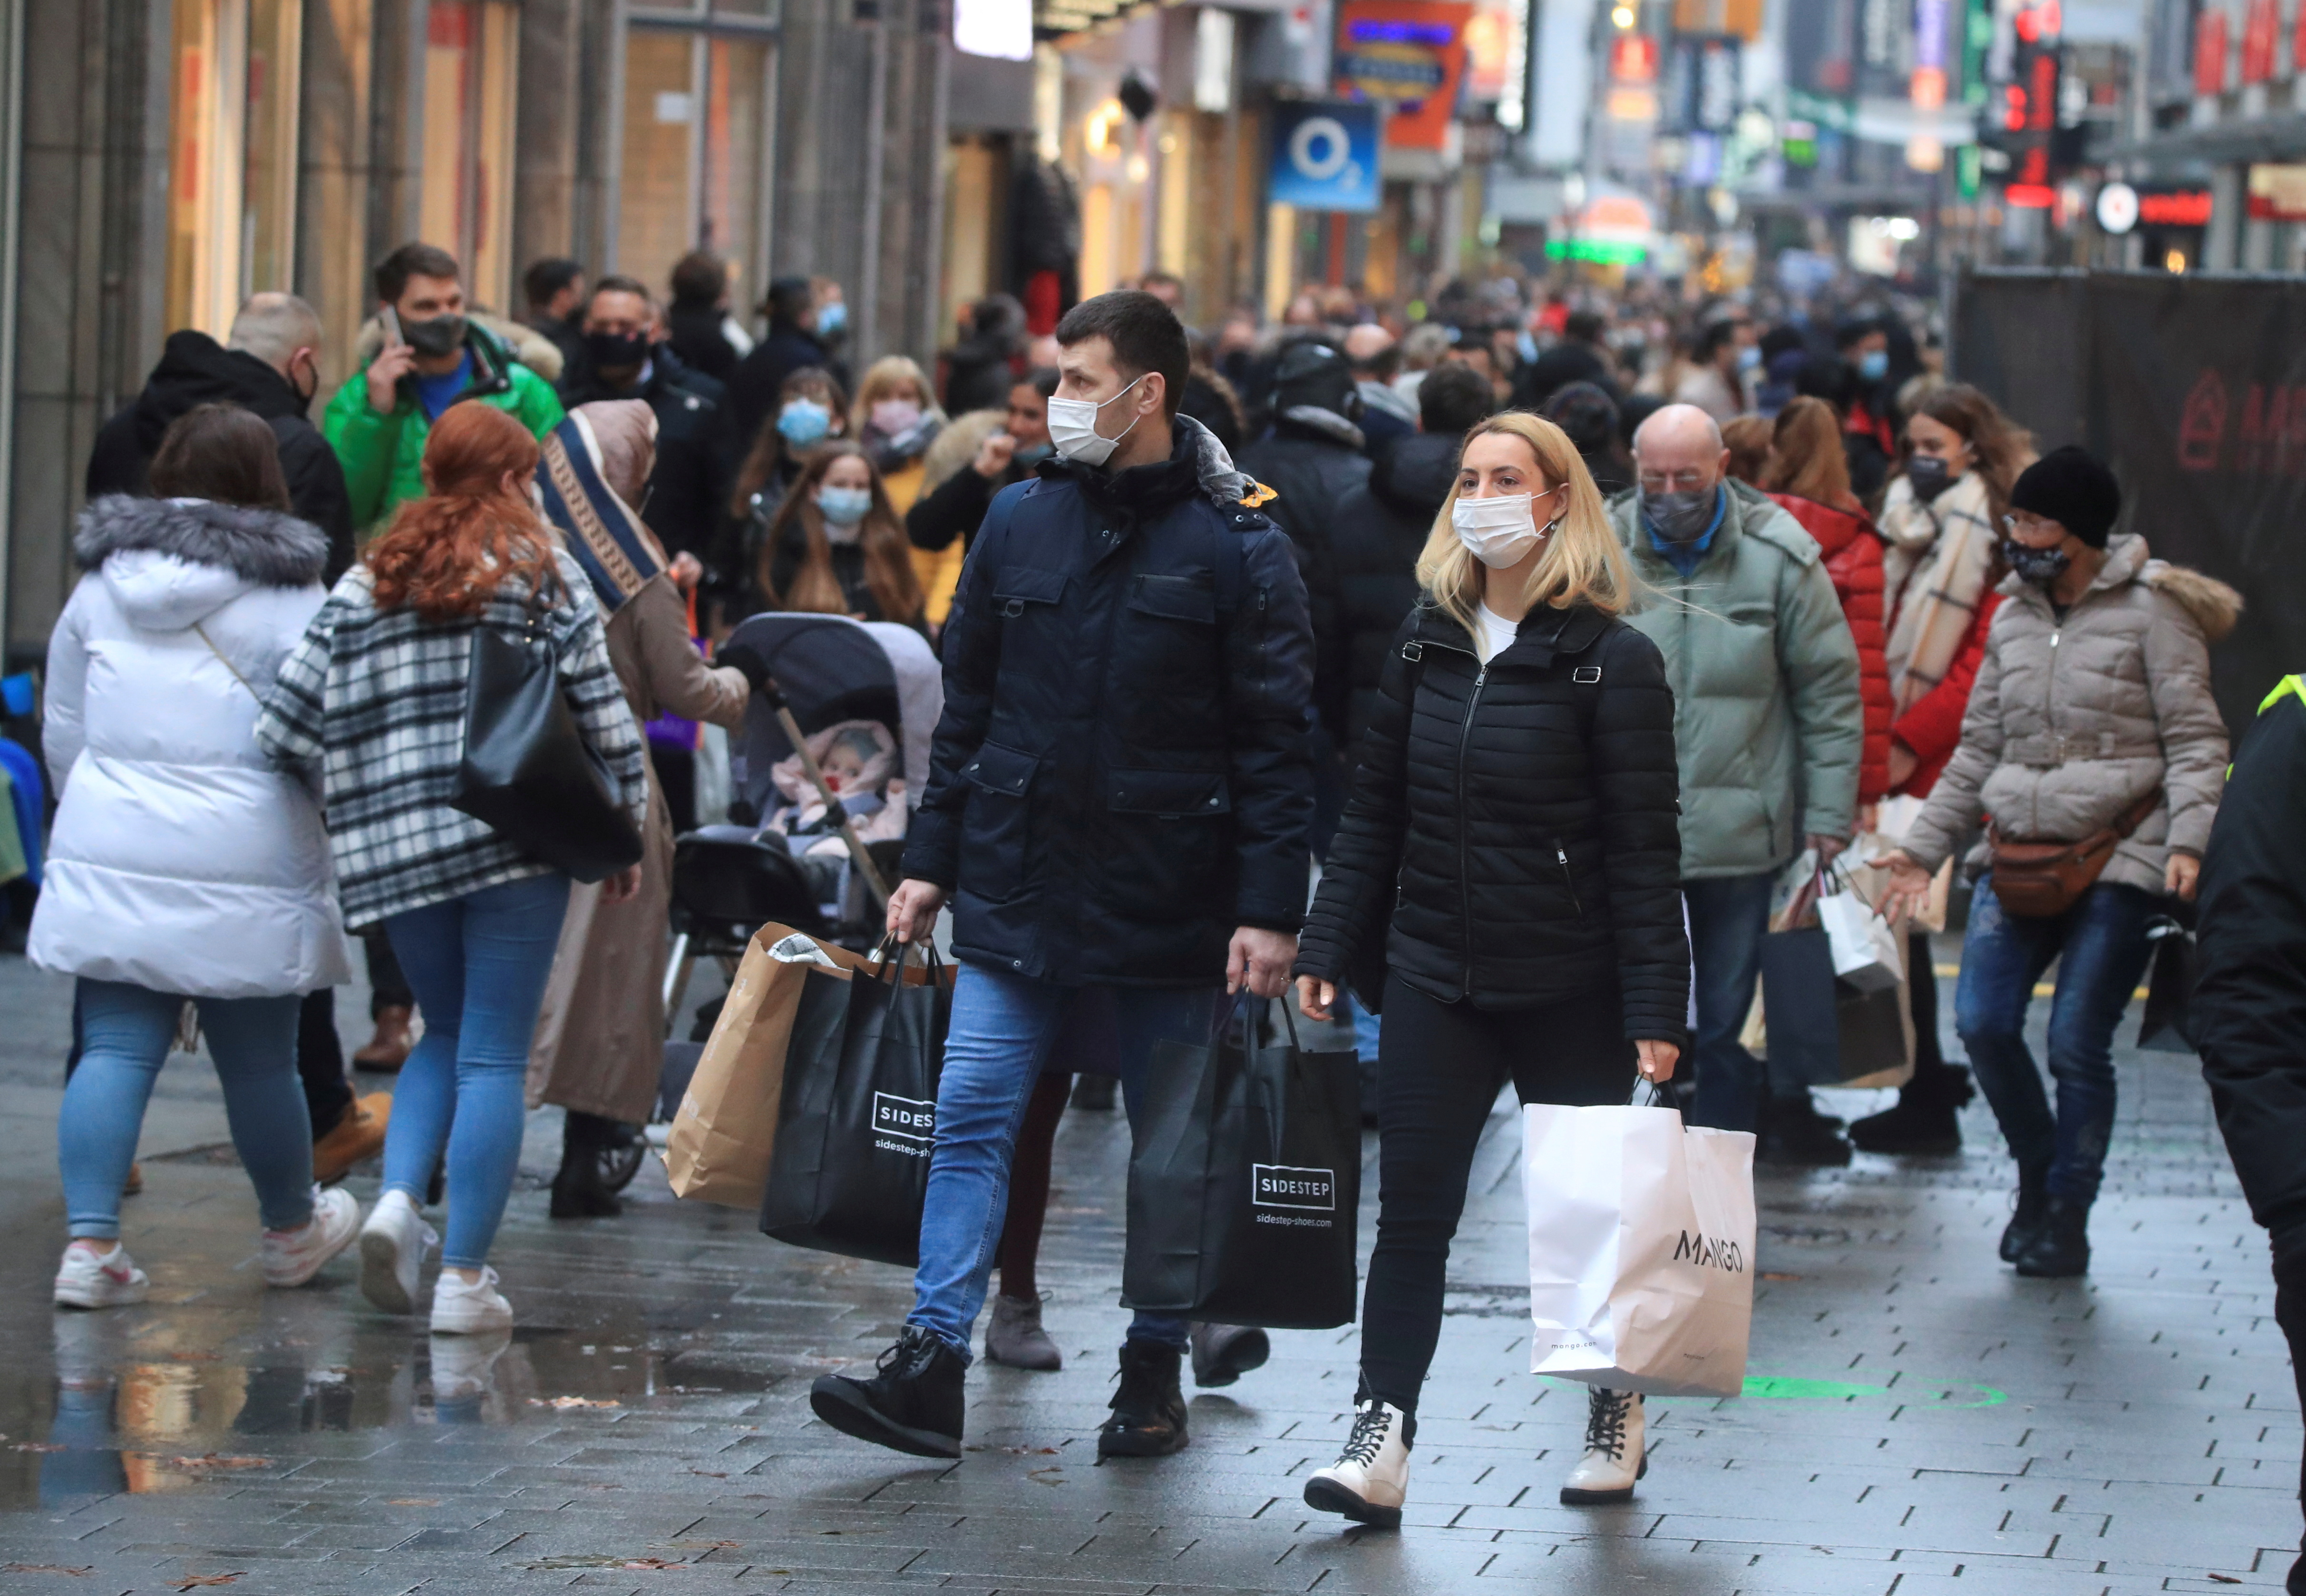 Christmas shoppers wear masks and fill Cologne's main shopping street Hohe Strasse (High Street) during the coronavirus disease (COVID-19) pandemic in Cologne, Germany, December 12, 2020.  REUTERS/Wolfgang Rattay/File Photo   